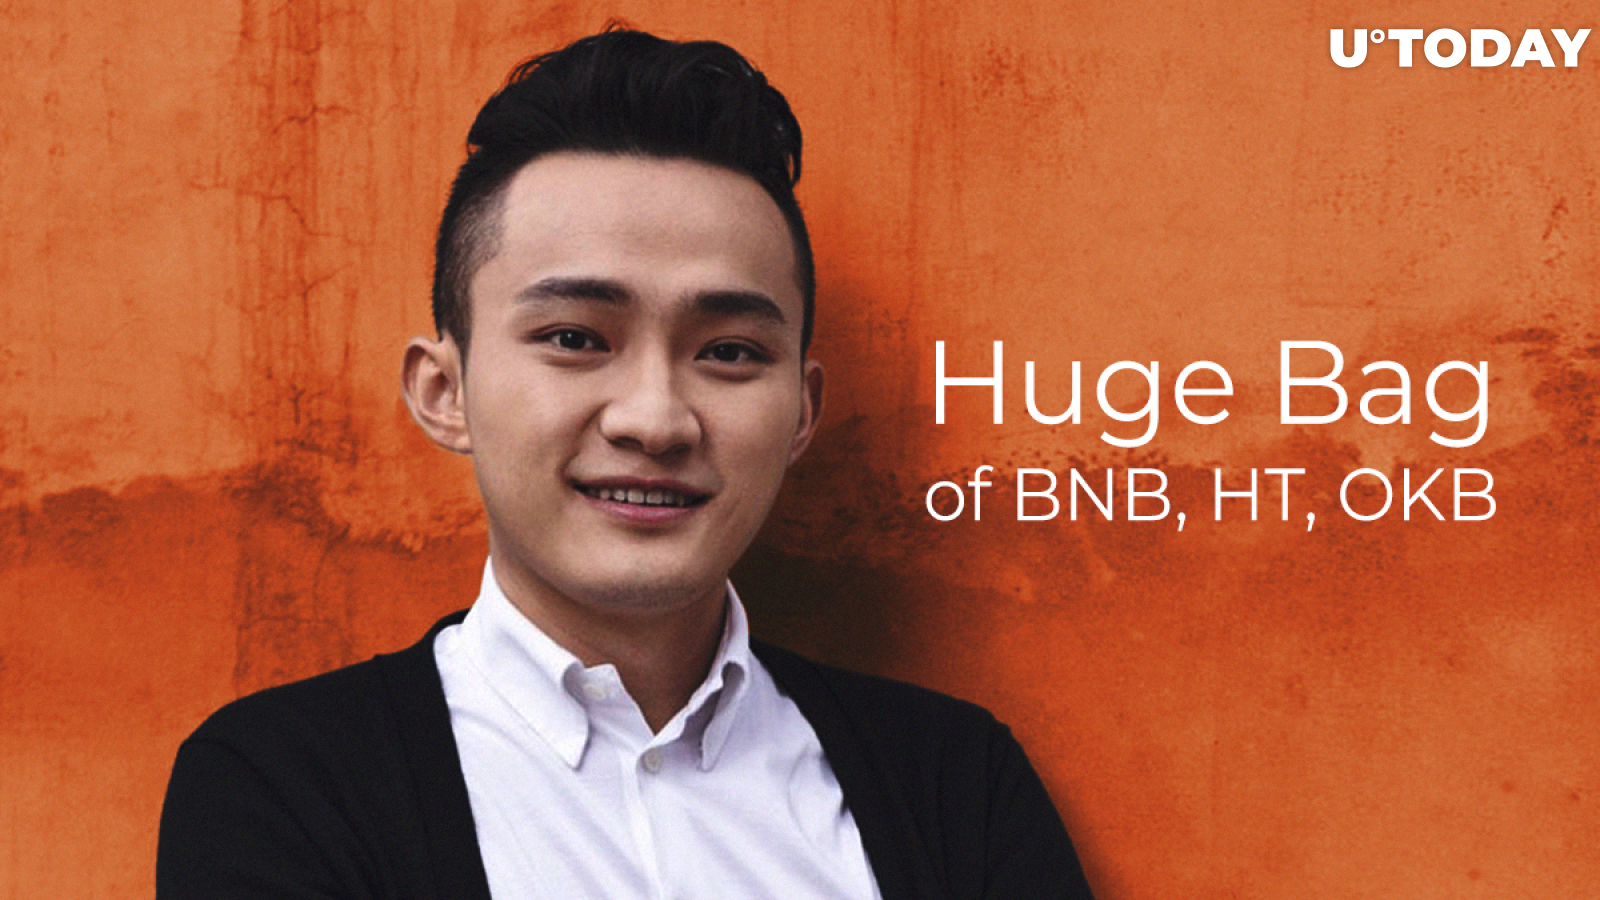 Tron CEO Justin Sun Reveals Holding ‘Huge Bag’ of BNB, HT, OKB - Will Huobi and OKEx Become New Tron SRs?